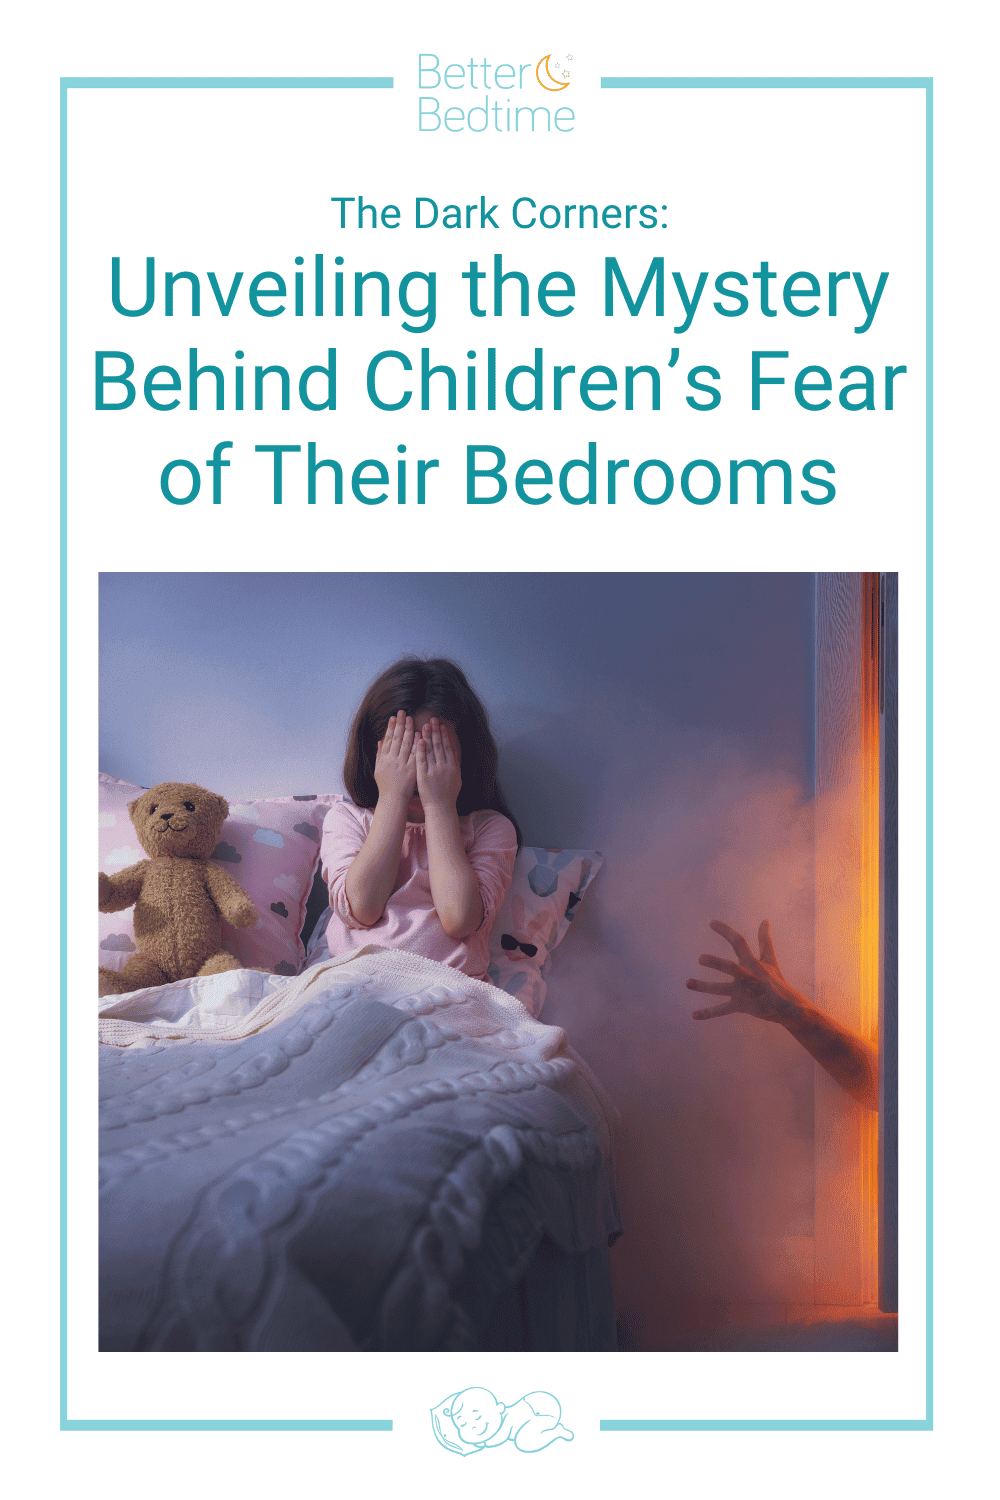 The Dark Corners: Unveiling the Mystery Behind Children’s Fear of Their Bedrooms